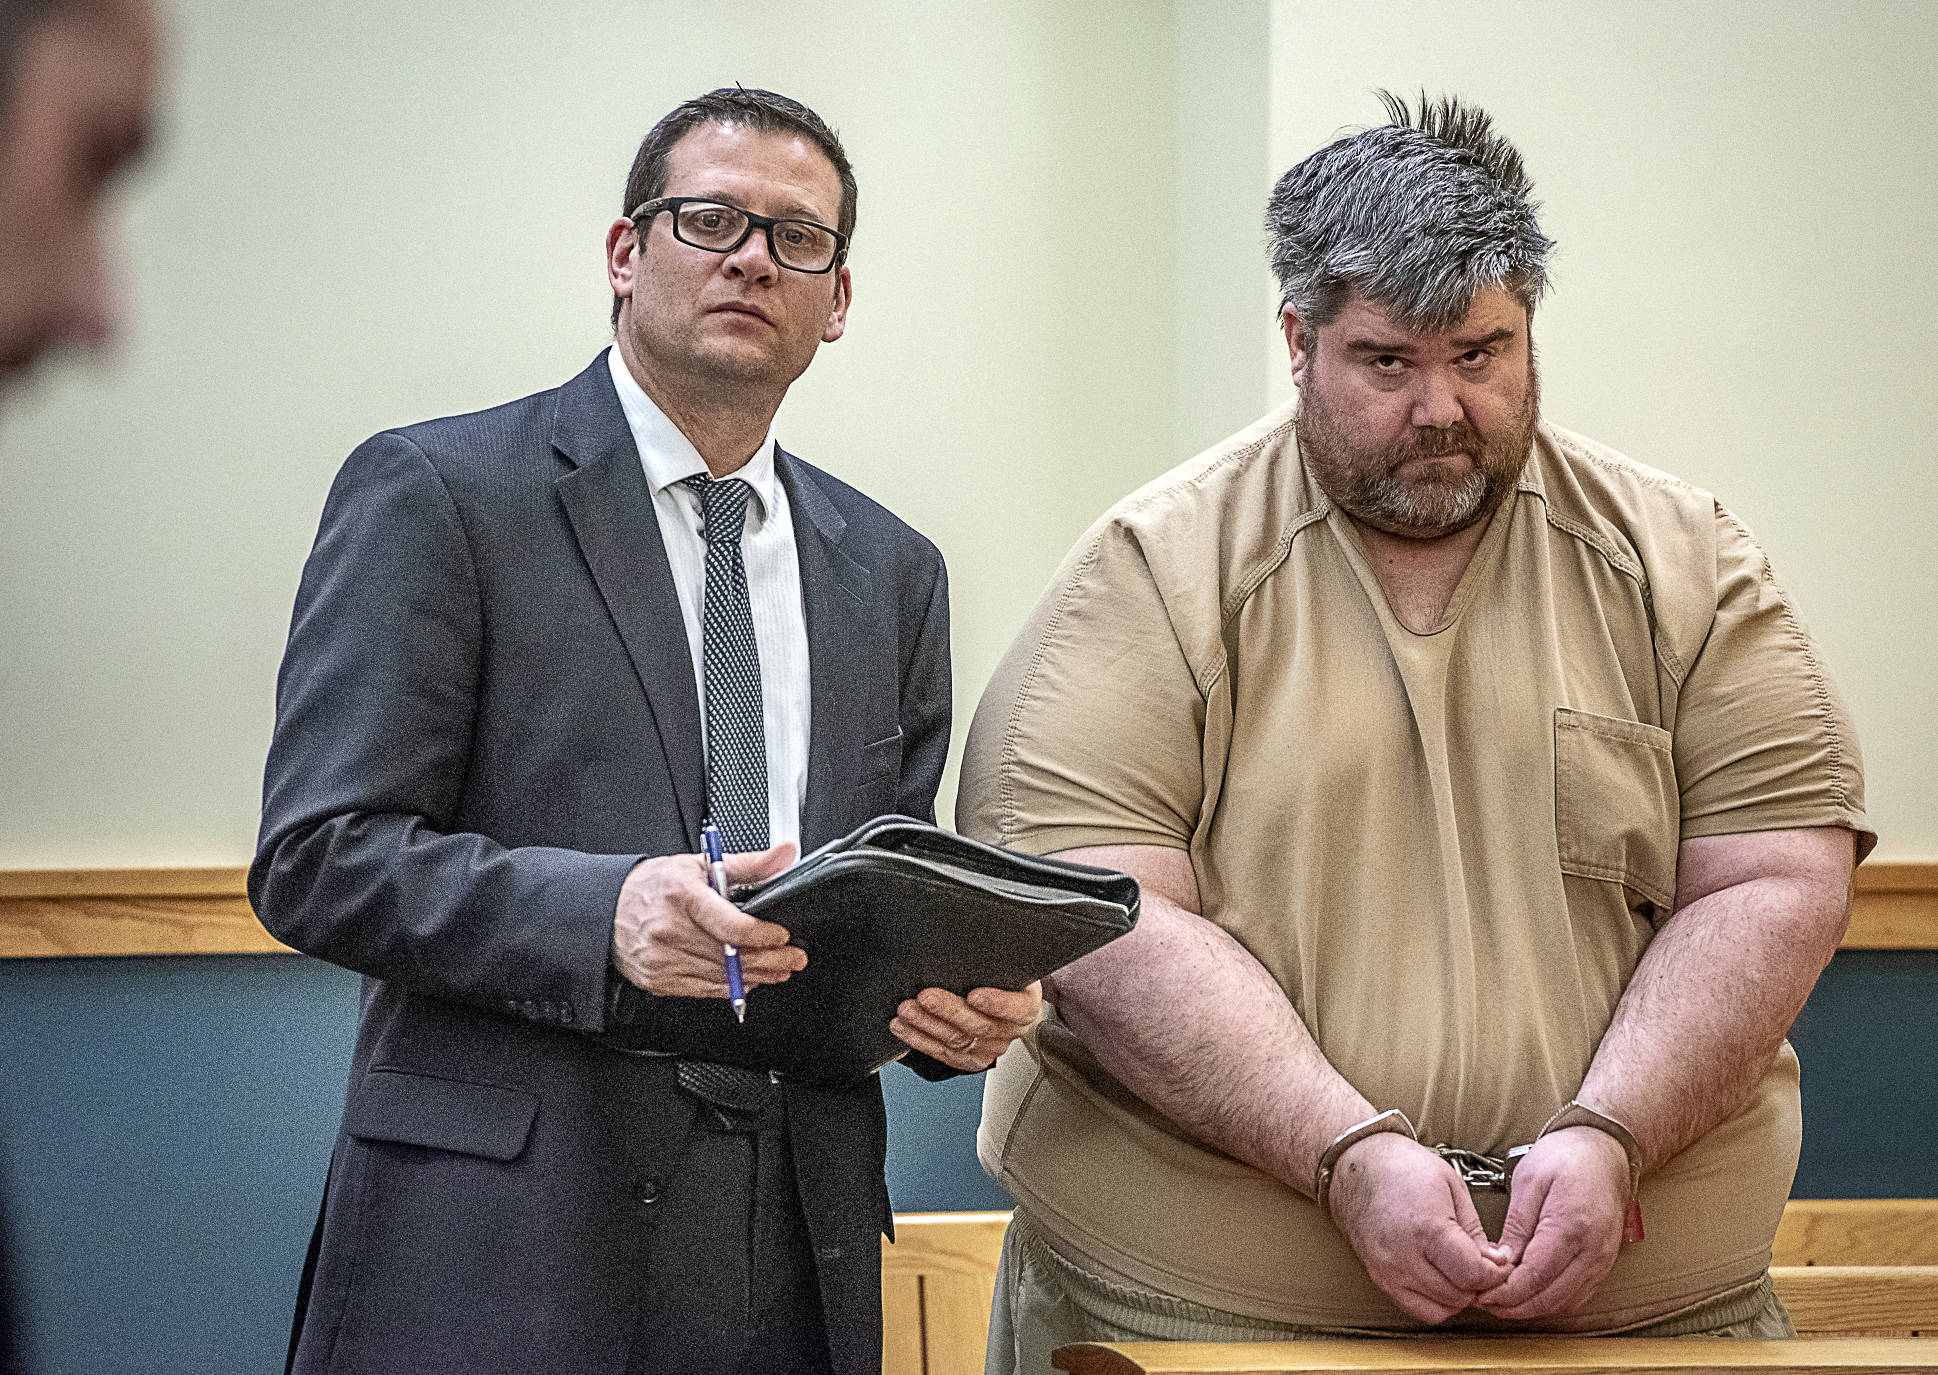 Steven Downs, 44, of Auburn, Maine, right, stands for his initial appearance in 8th District Court in Lewiston, Maine, on Tuesday. Downs has been charged with the 1993 rape and murder of 20-year-old Sophie Sergie at the University of Alaska Fairbanks. Standing with Downs is Attorney Richard Charest. (Andree Kehn/Sun Journal via AP)